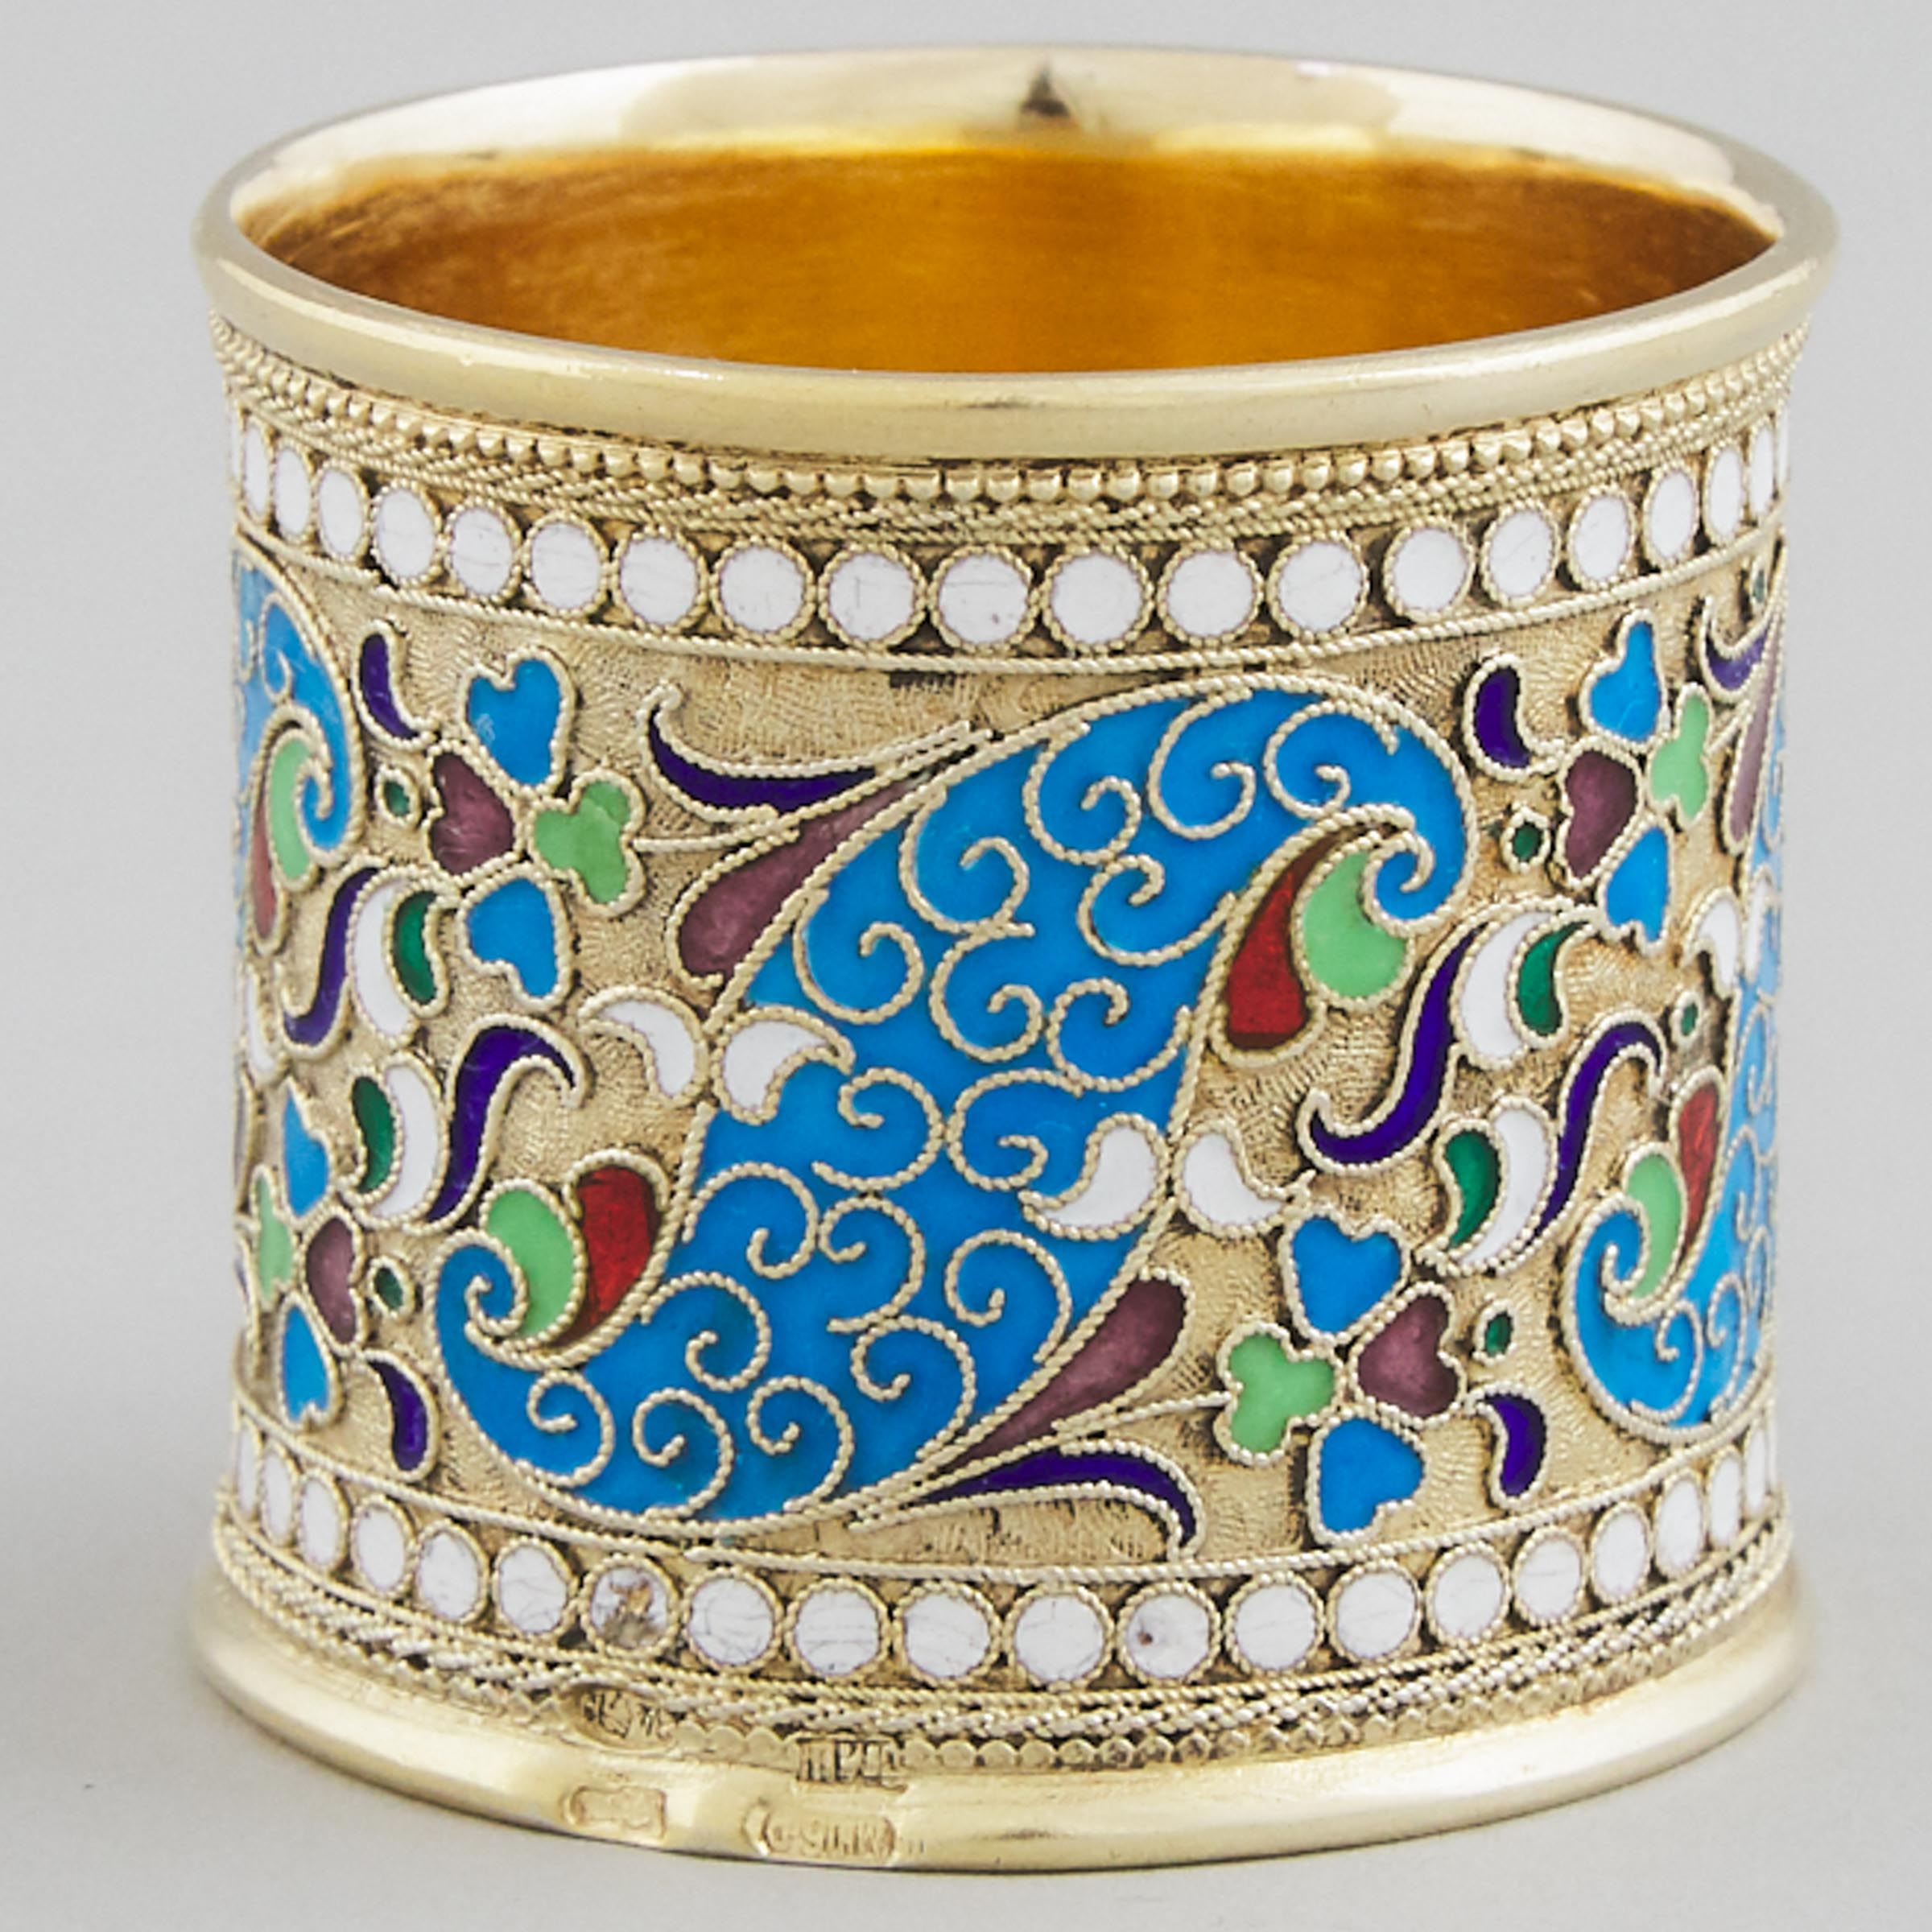 Russian Silver-Gilt and Cloisonné Enamel Napkin Ring, Moscow, c.1899-1908